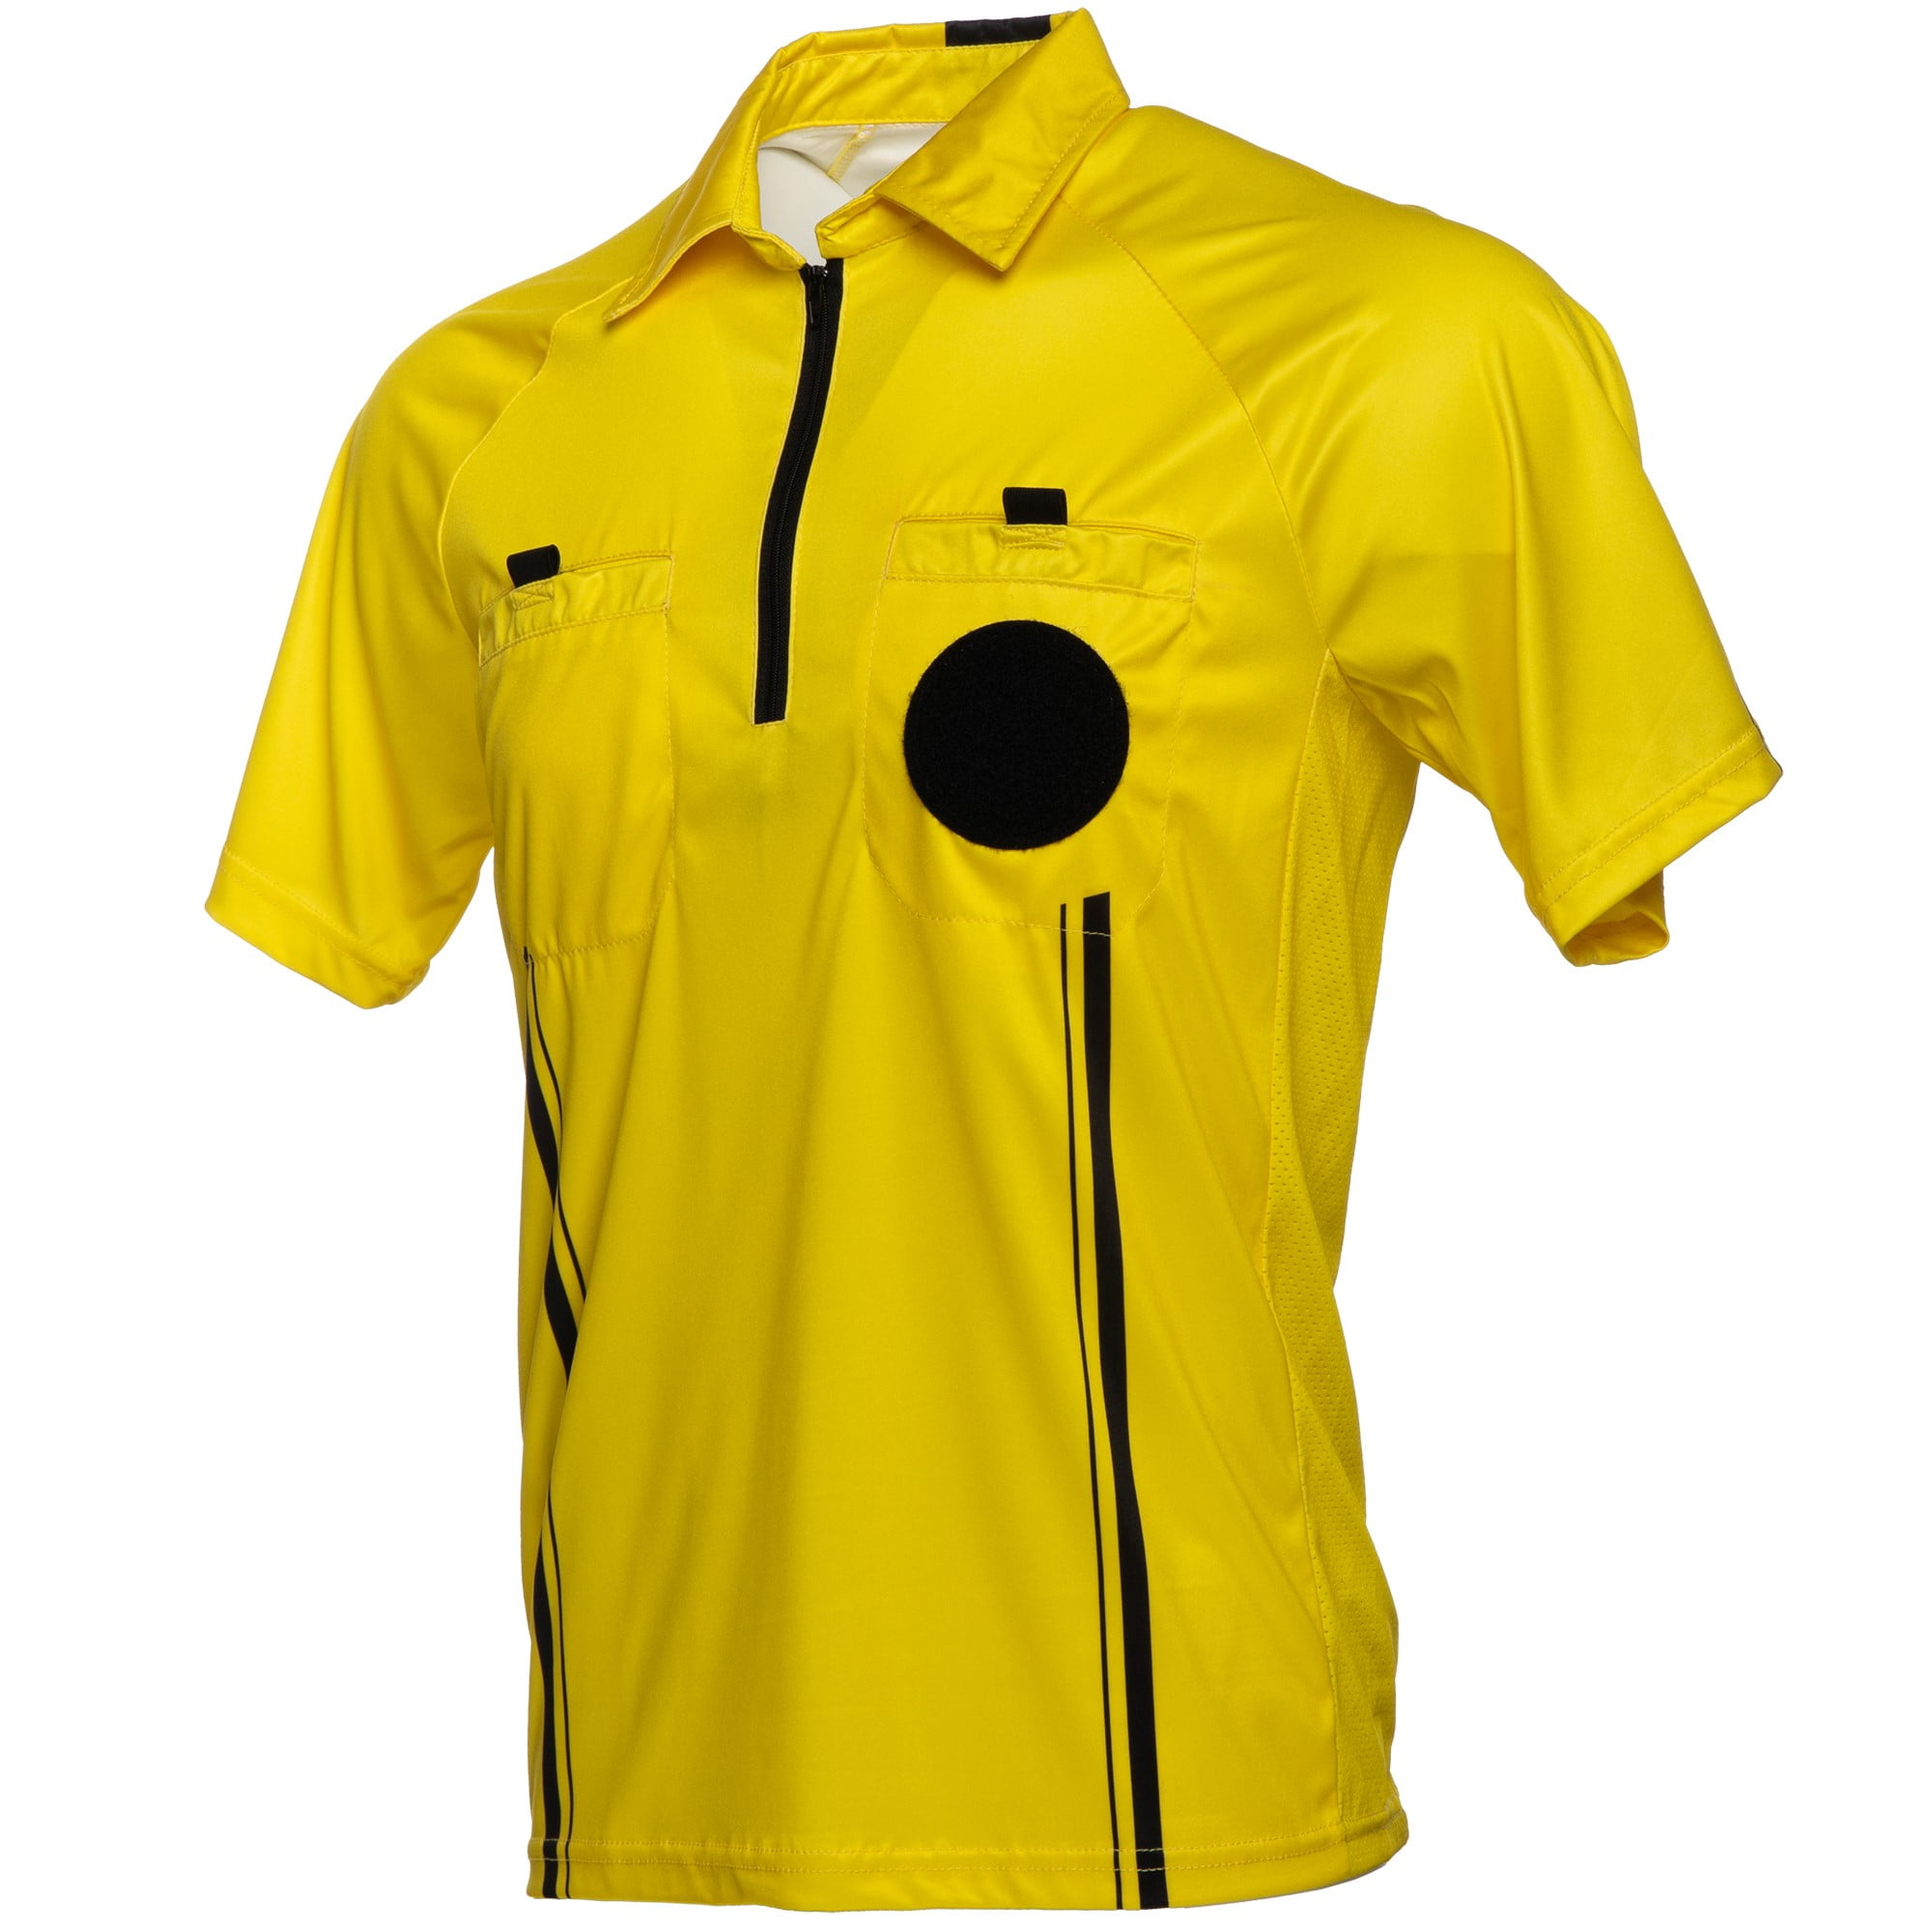 Officials Short Sleeve Soccer Referee Shirt Murray Sporting Goods USSF Pro-Style Soccer Referee Jersey Short Sleeve 